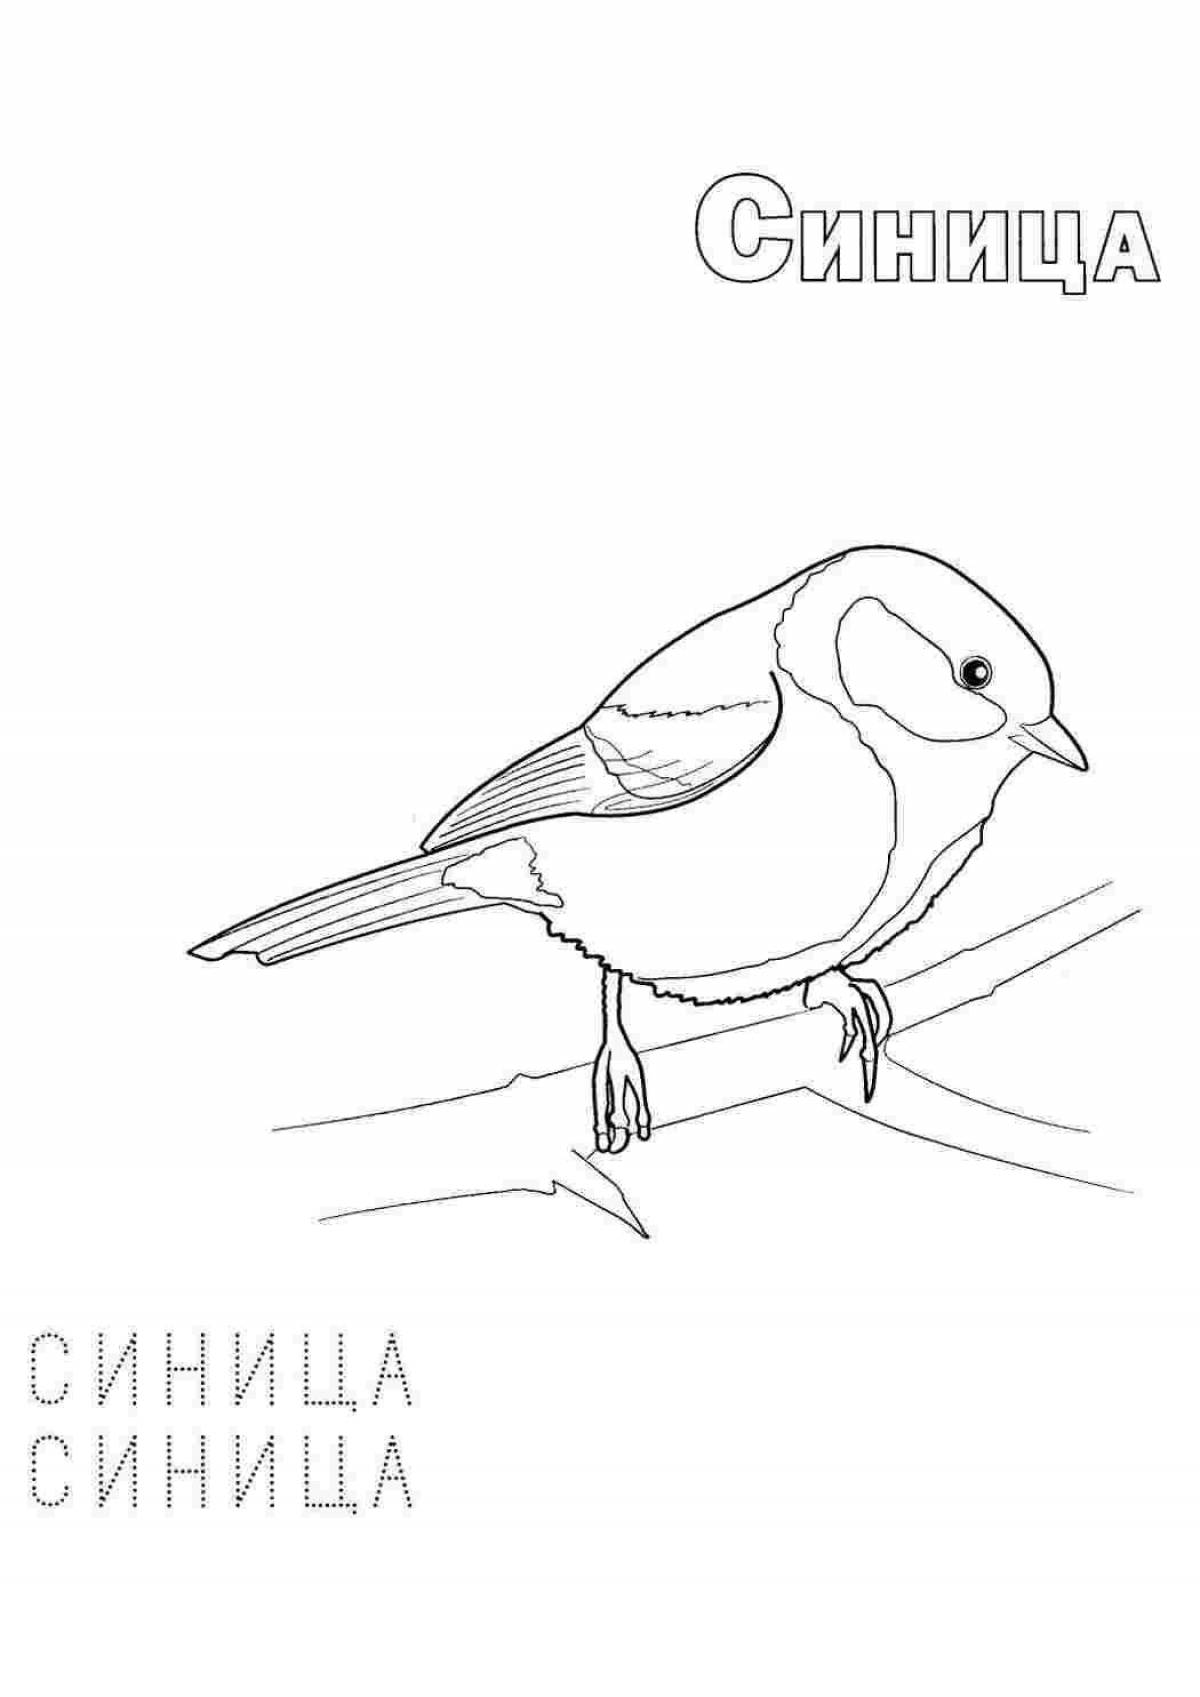 Awesome titmouse coloring page for 6-7 year olds